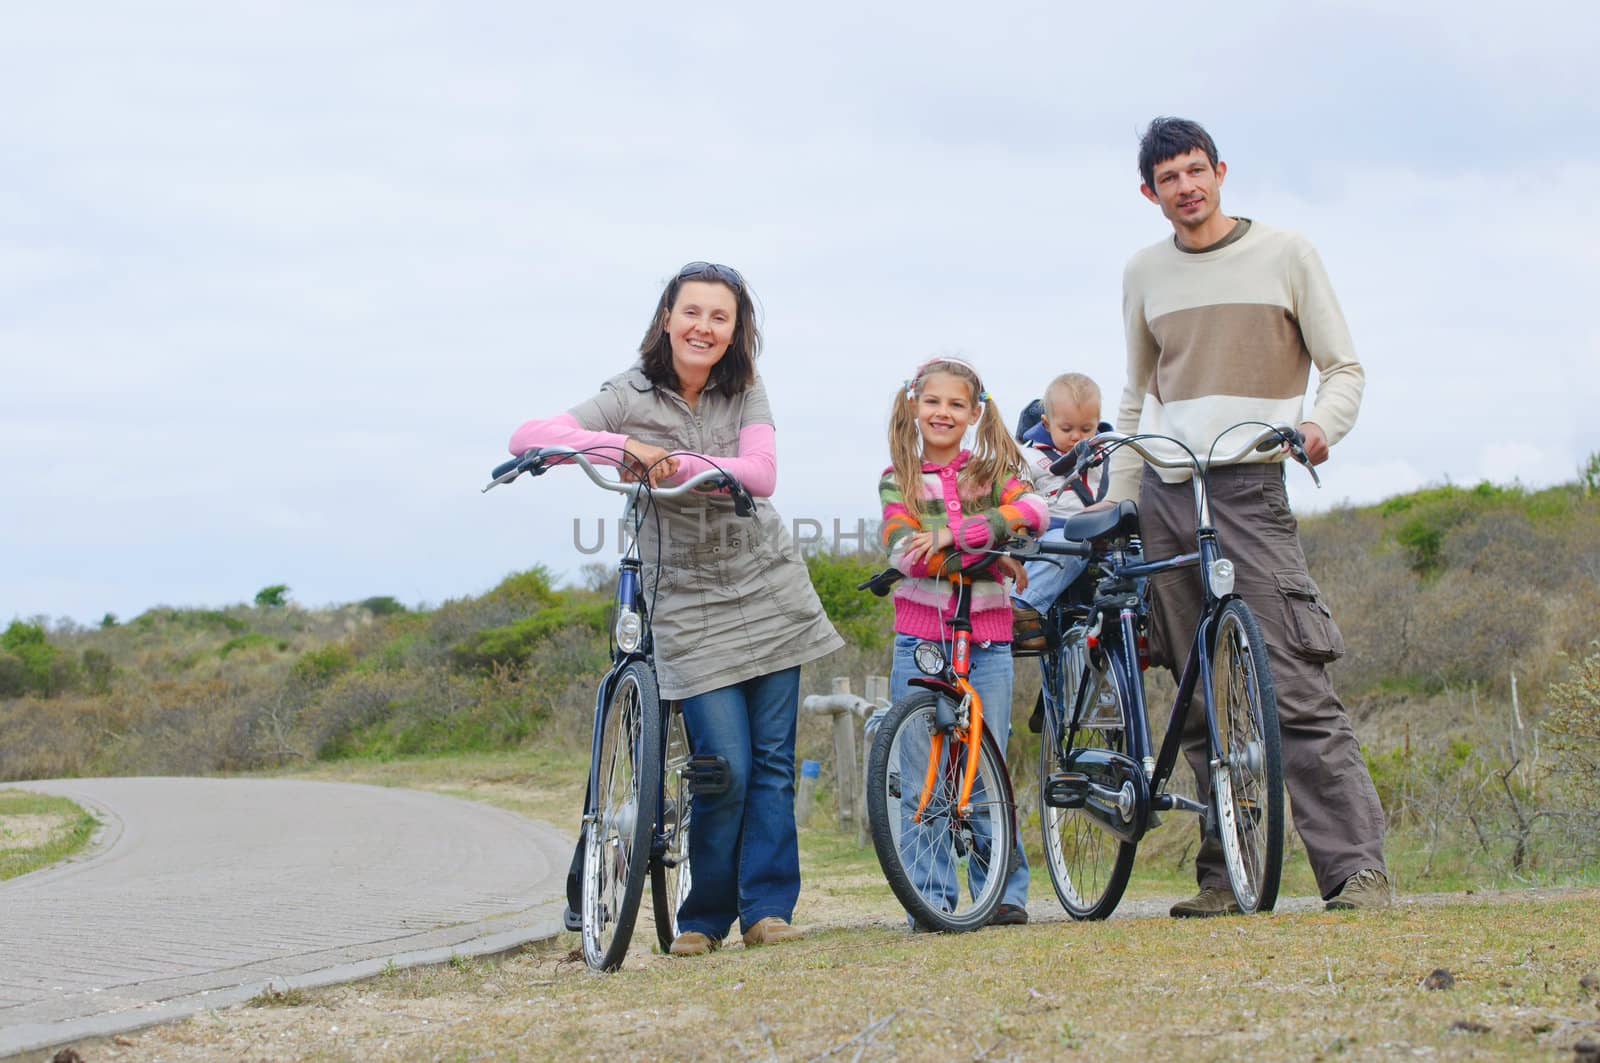 A family with children having a weekend excursion on their bikes